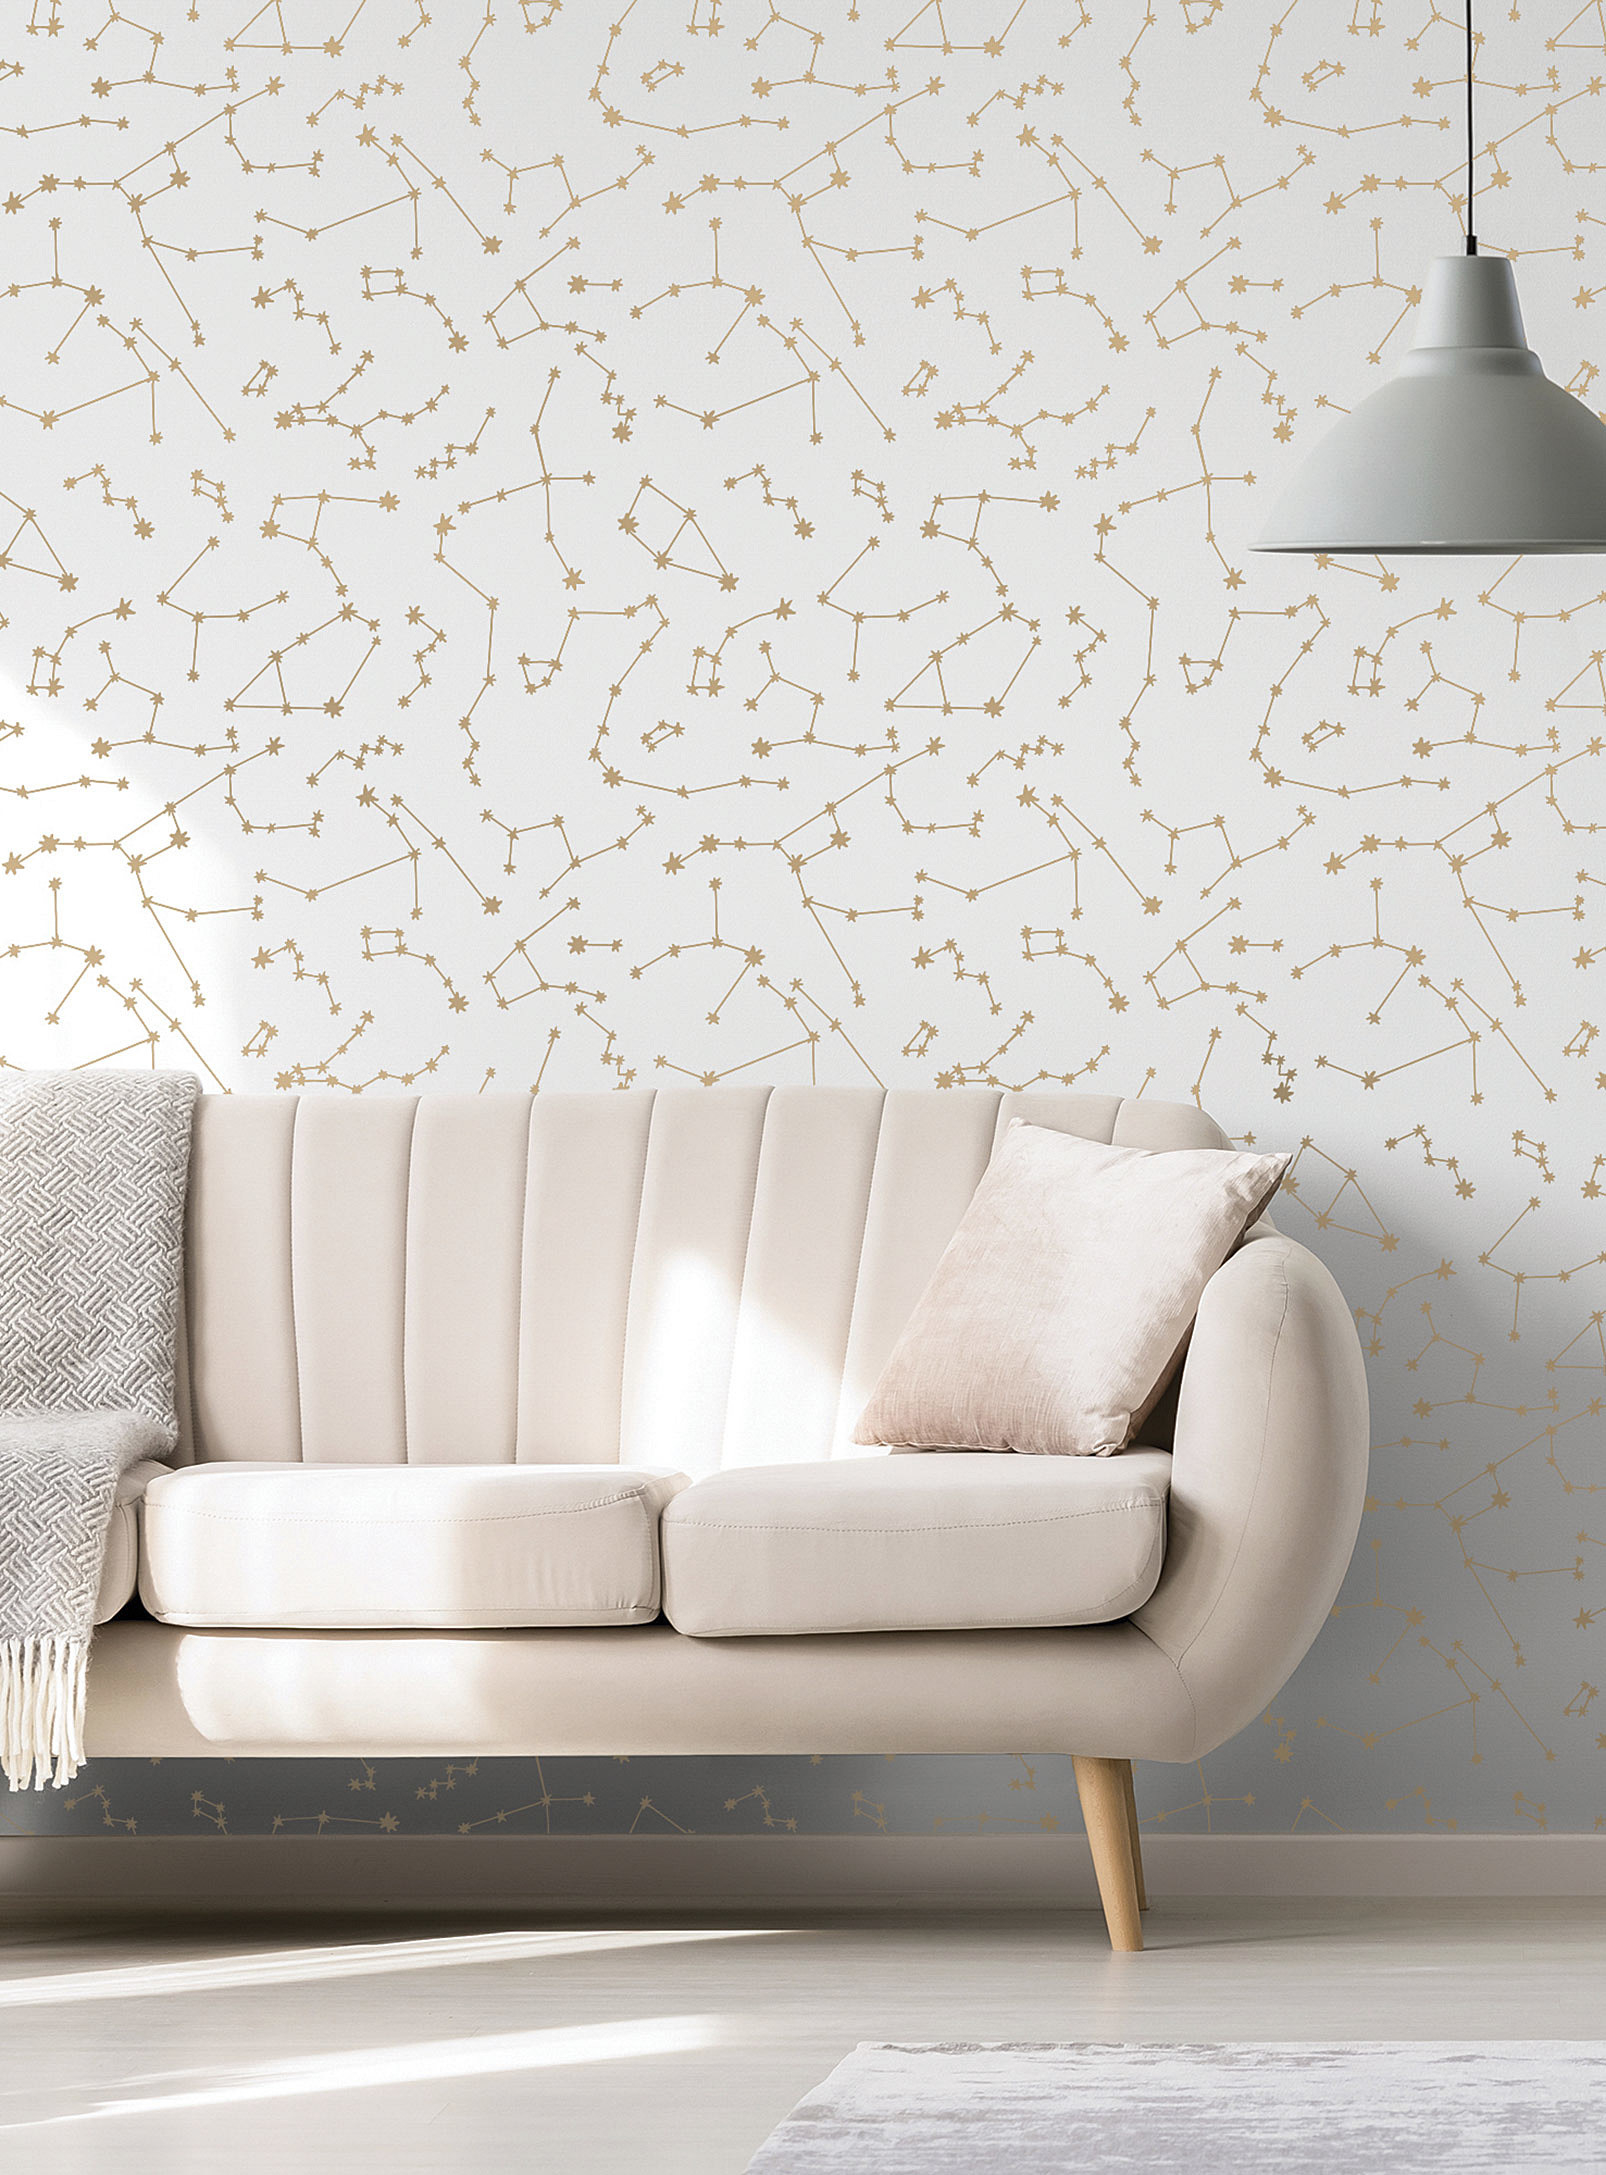 A wall covered in constellation wallpaper with a couch in front of it